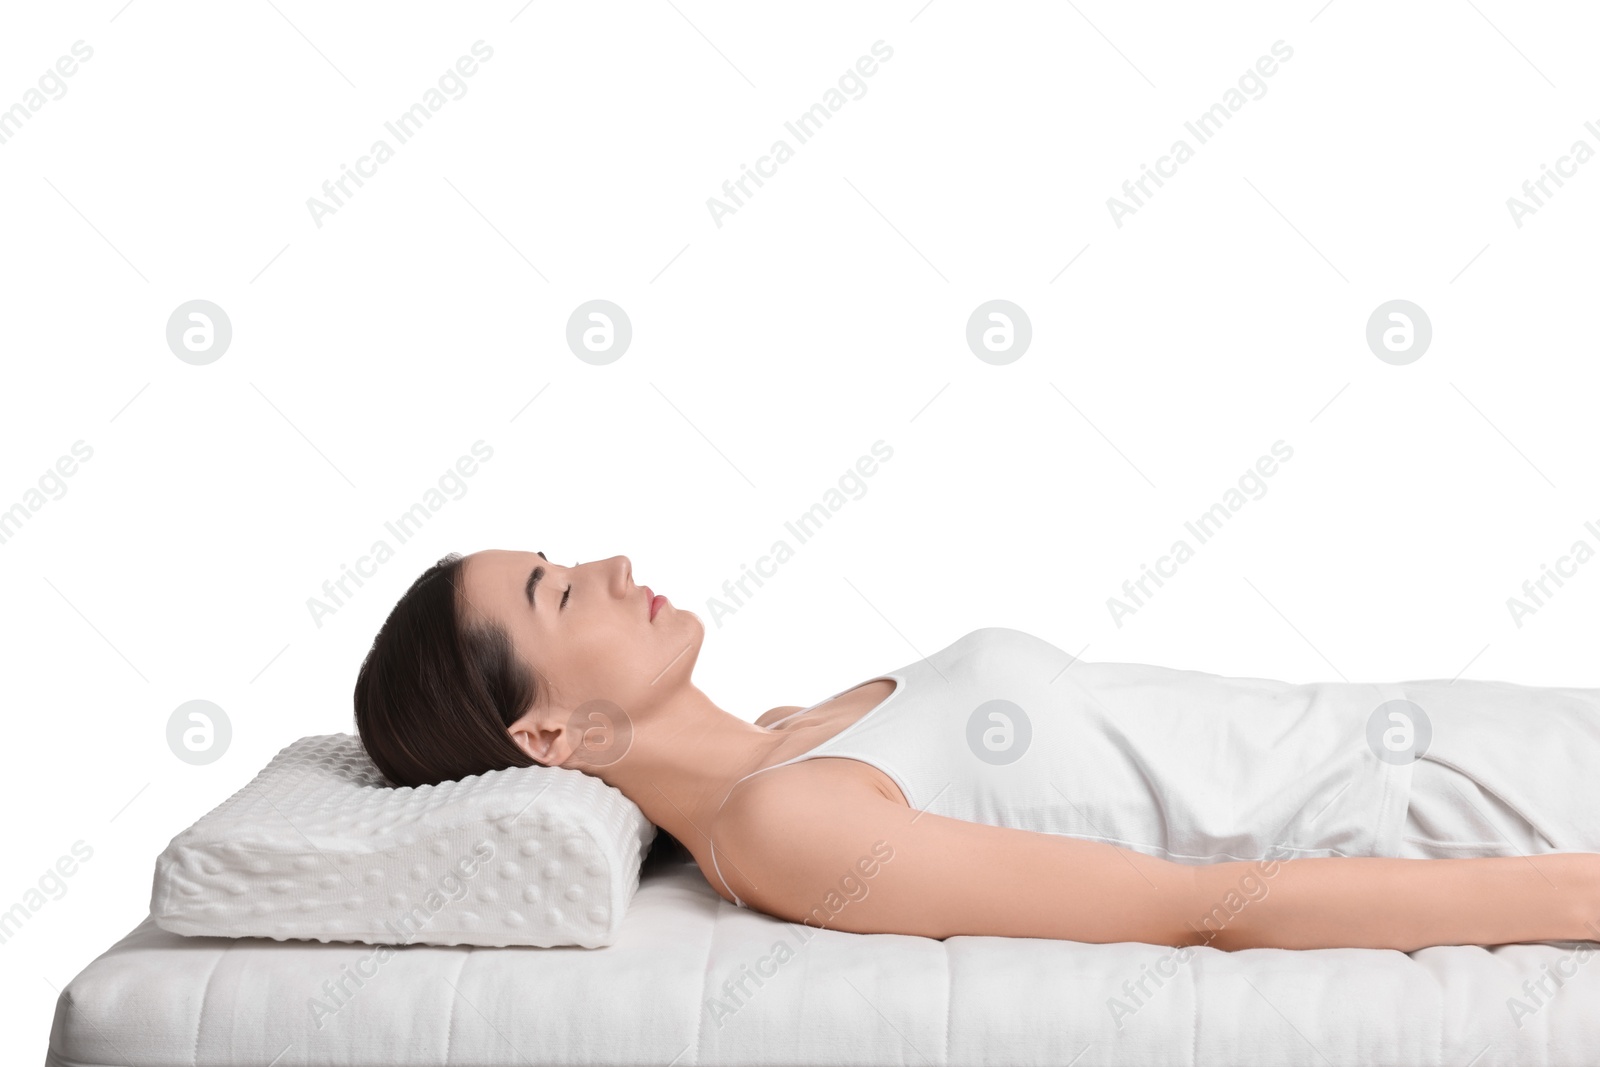 Photo of Woman sleeping on orthopedic pillow against white background